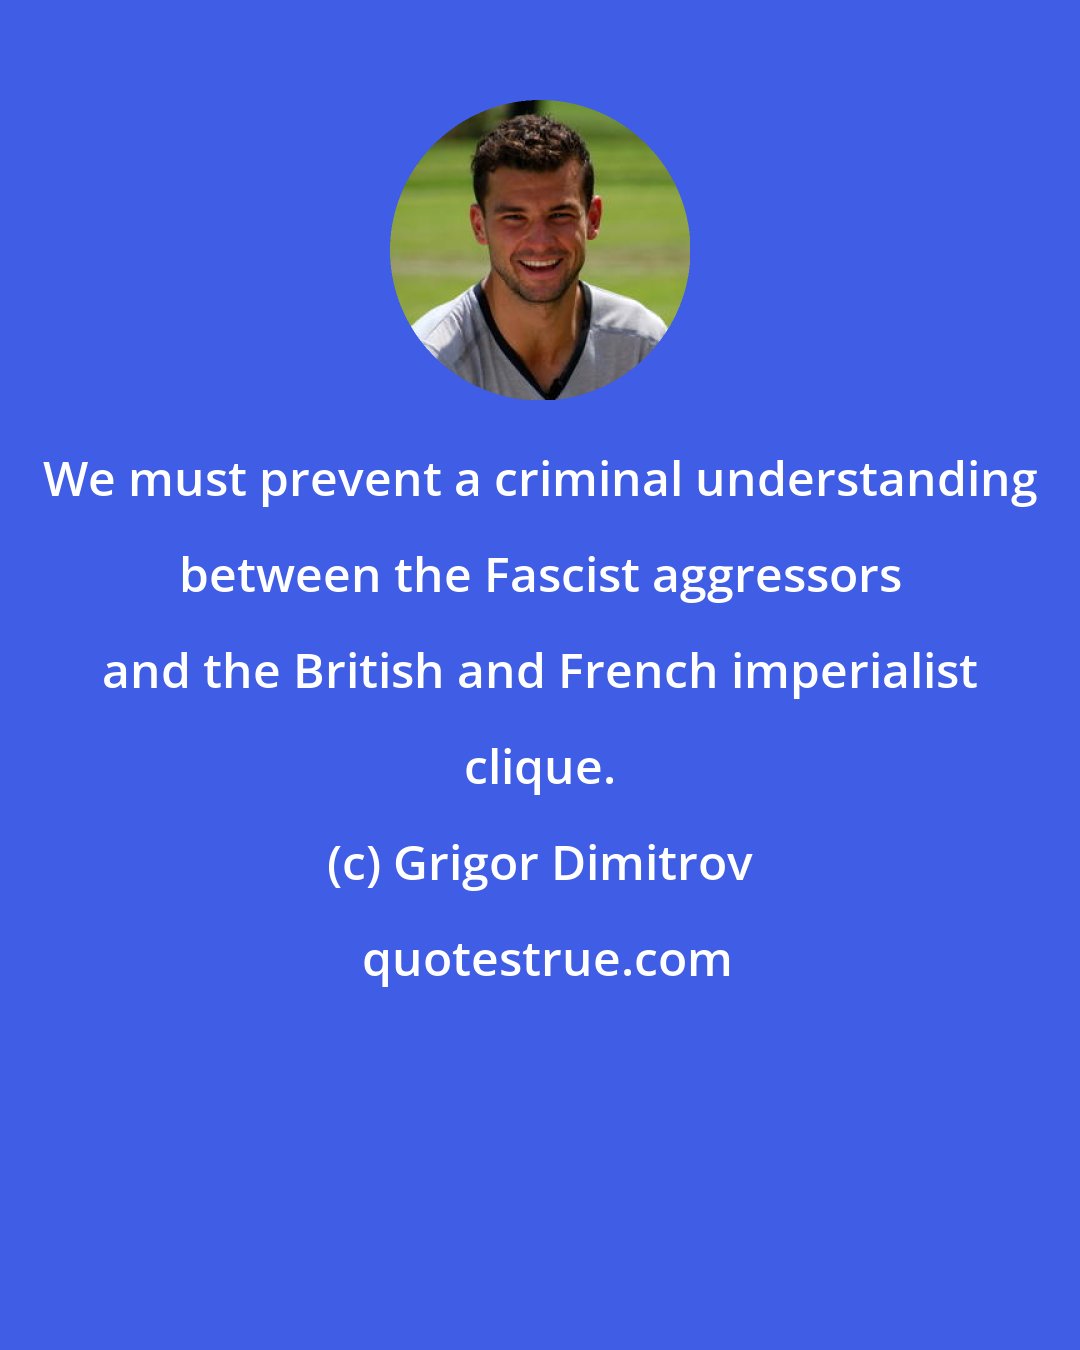 Grigor Dimitrov: We must prevent a criminal understanding between the Fascist aggressors and the British and French imperialist clique.